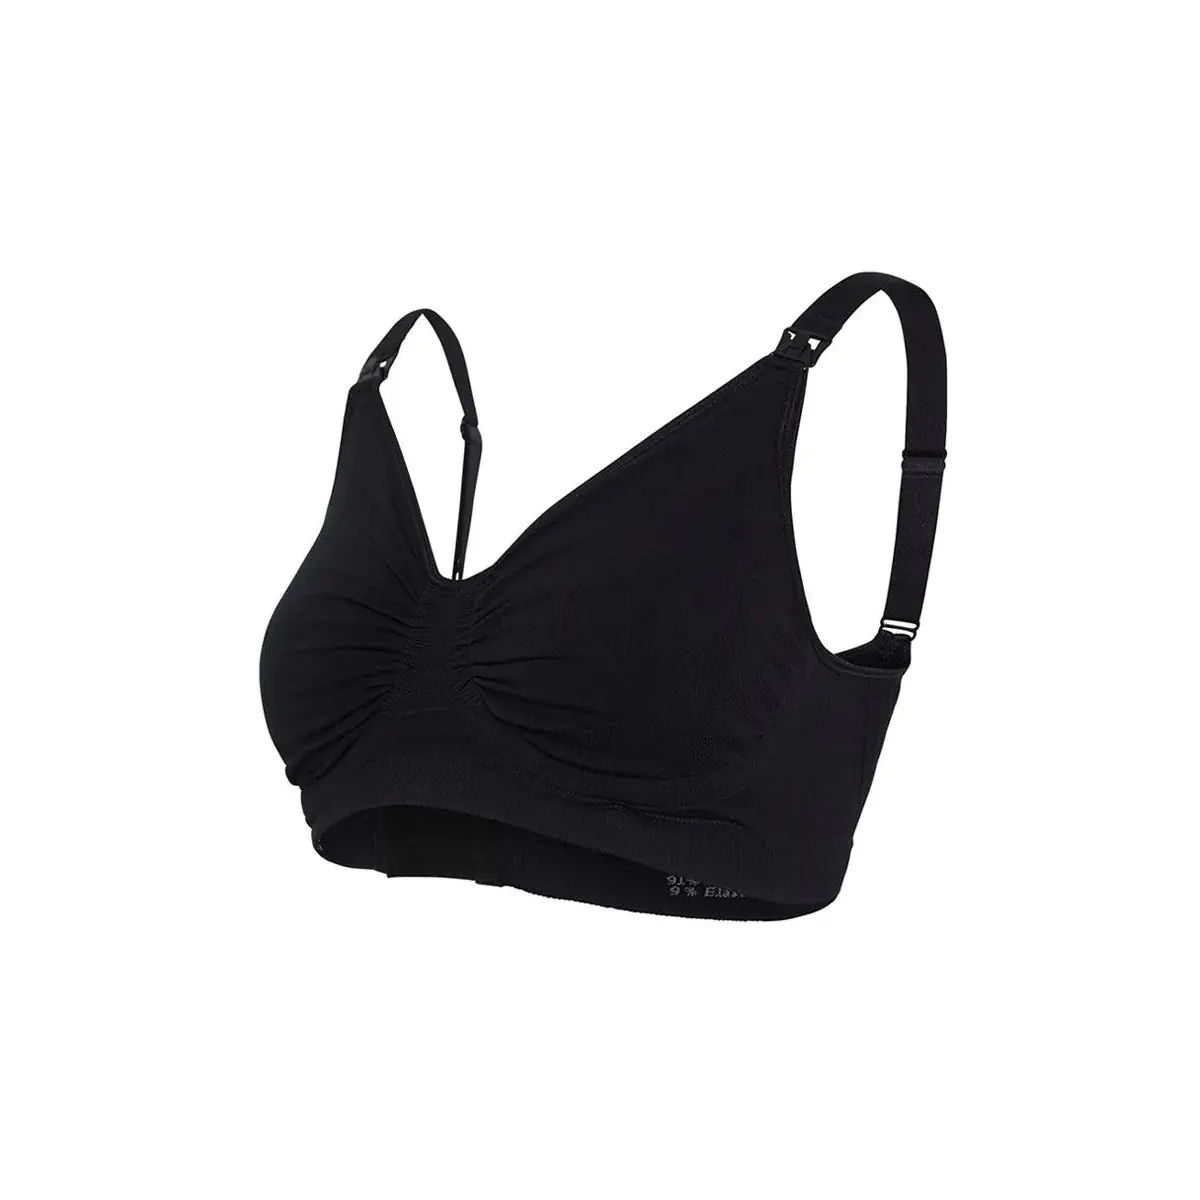 Image of Carriwell Maternity & Nursing Bra with Carri-Gel Support - Black (Size - LARGE)